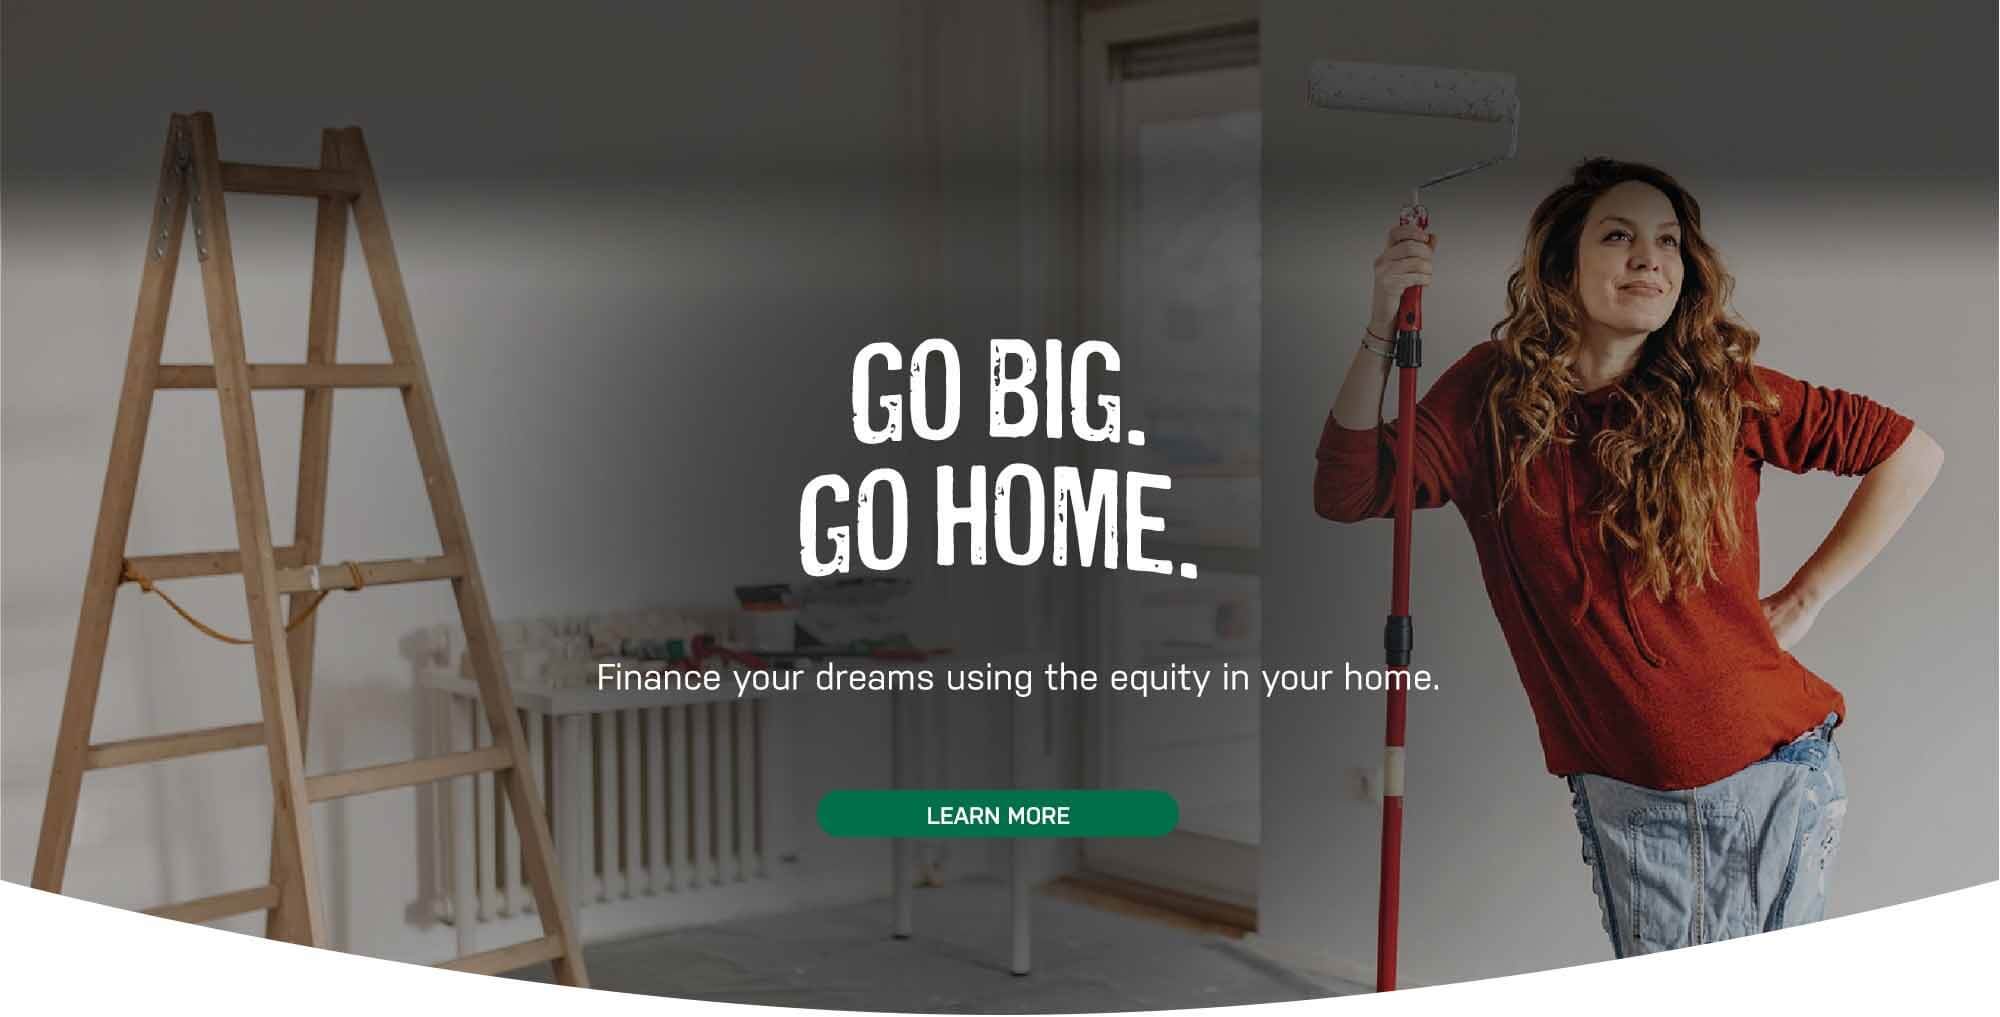 Go big. Go home. Finance your dreams using the equity in your home. Learn More